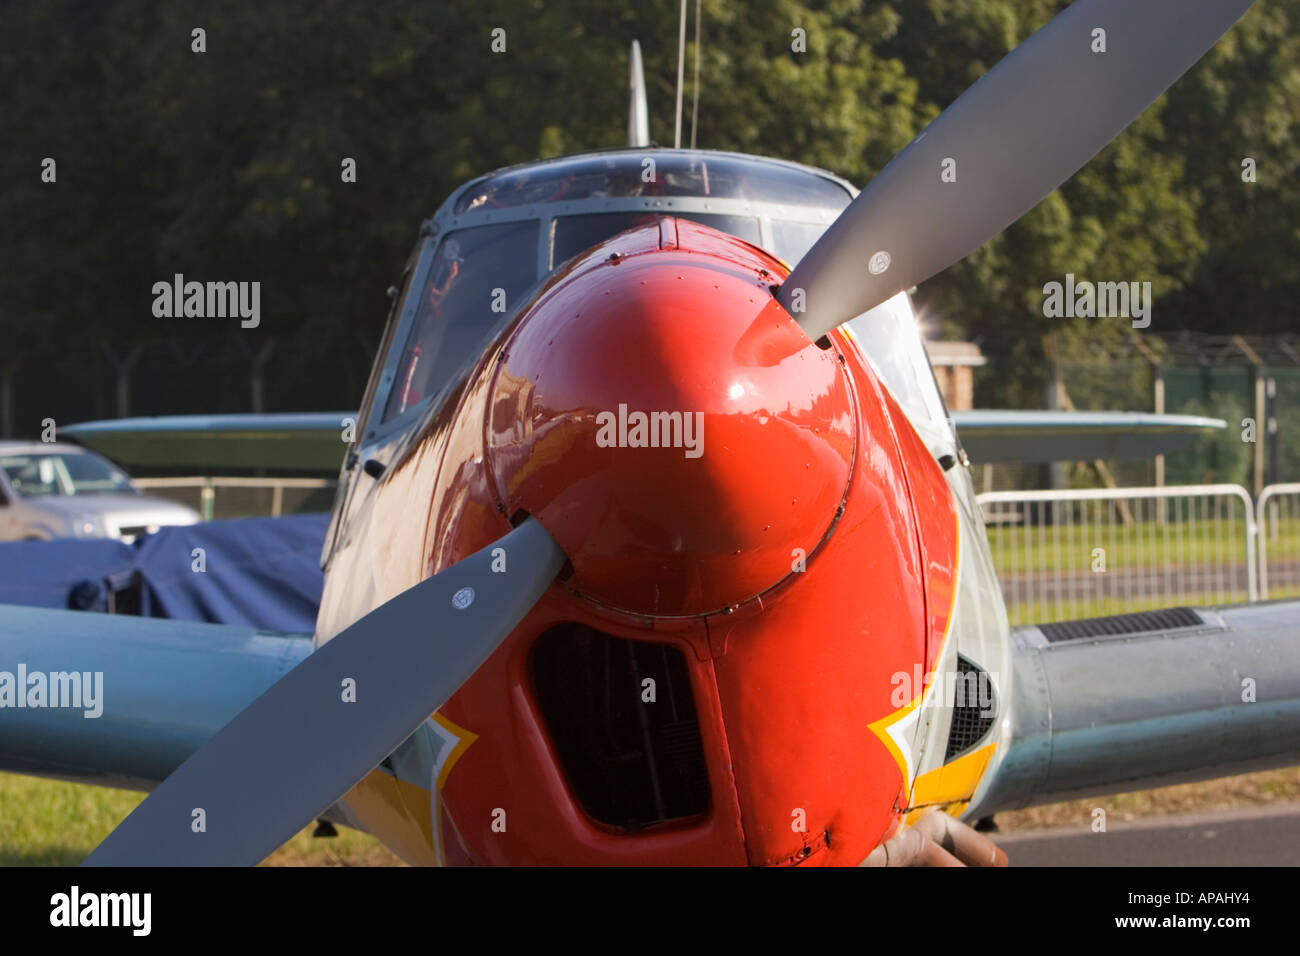 Bright red nose on single engine propeller aircraft Stock Photo